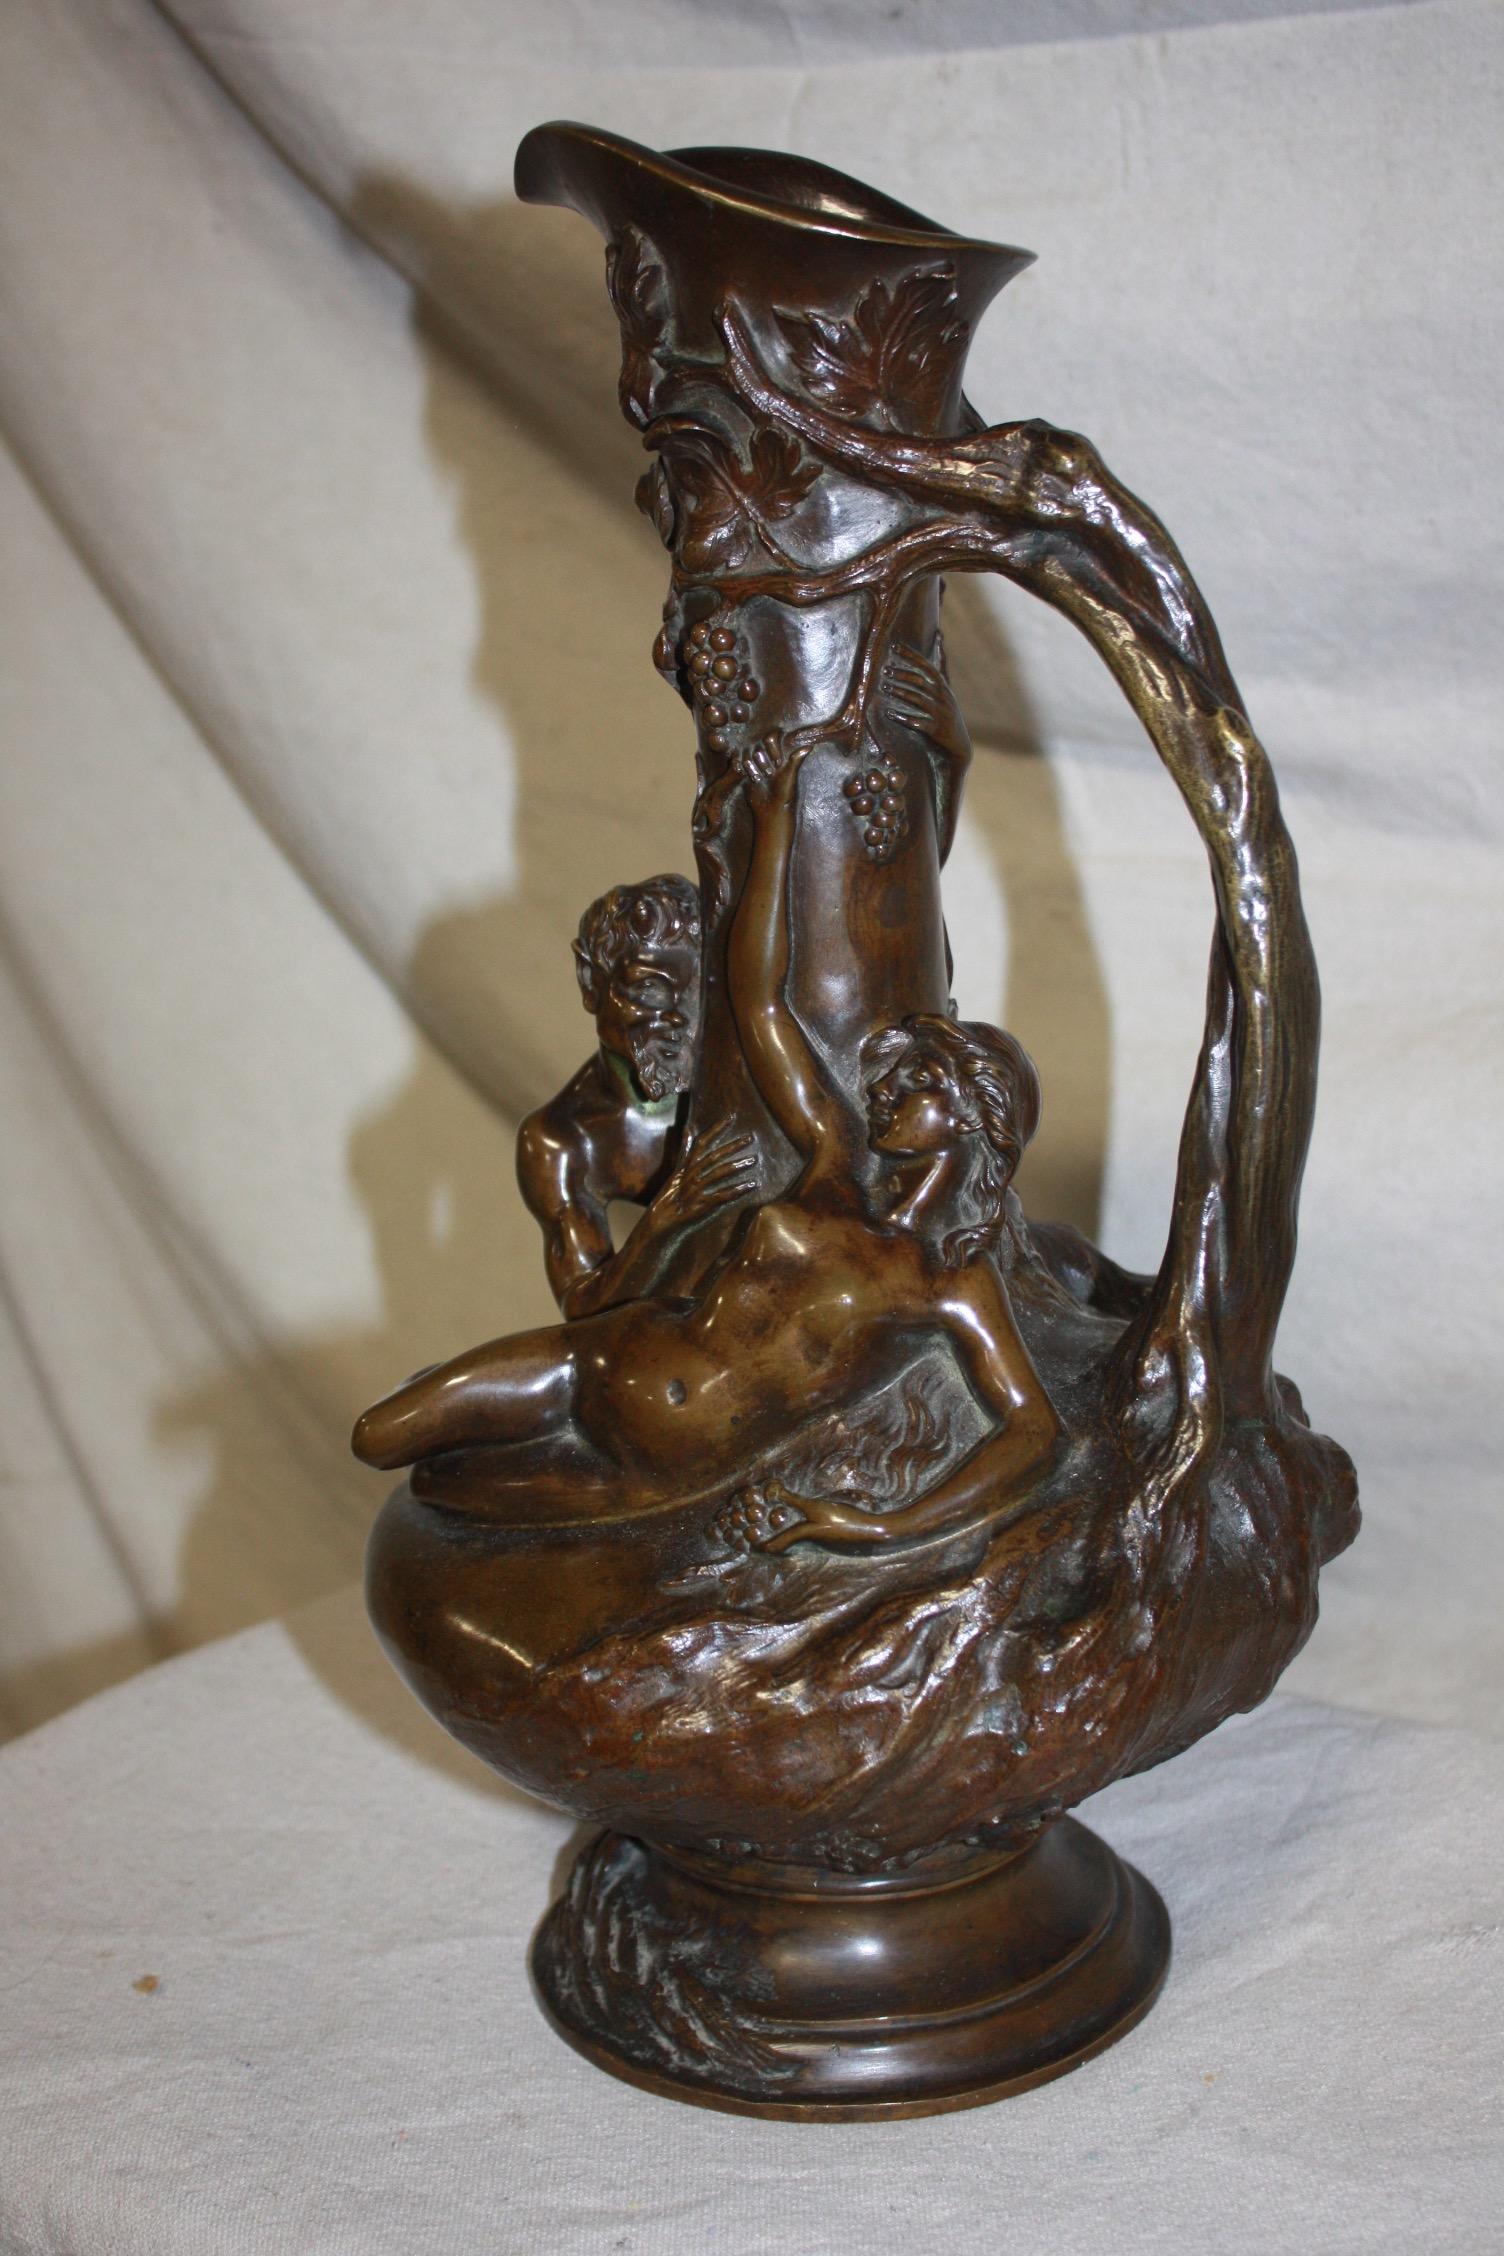 Early 20th Century French Sculpture Signed Noel Ruffier In Good Condition For Sale In Stockbridge, GA